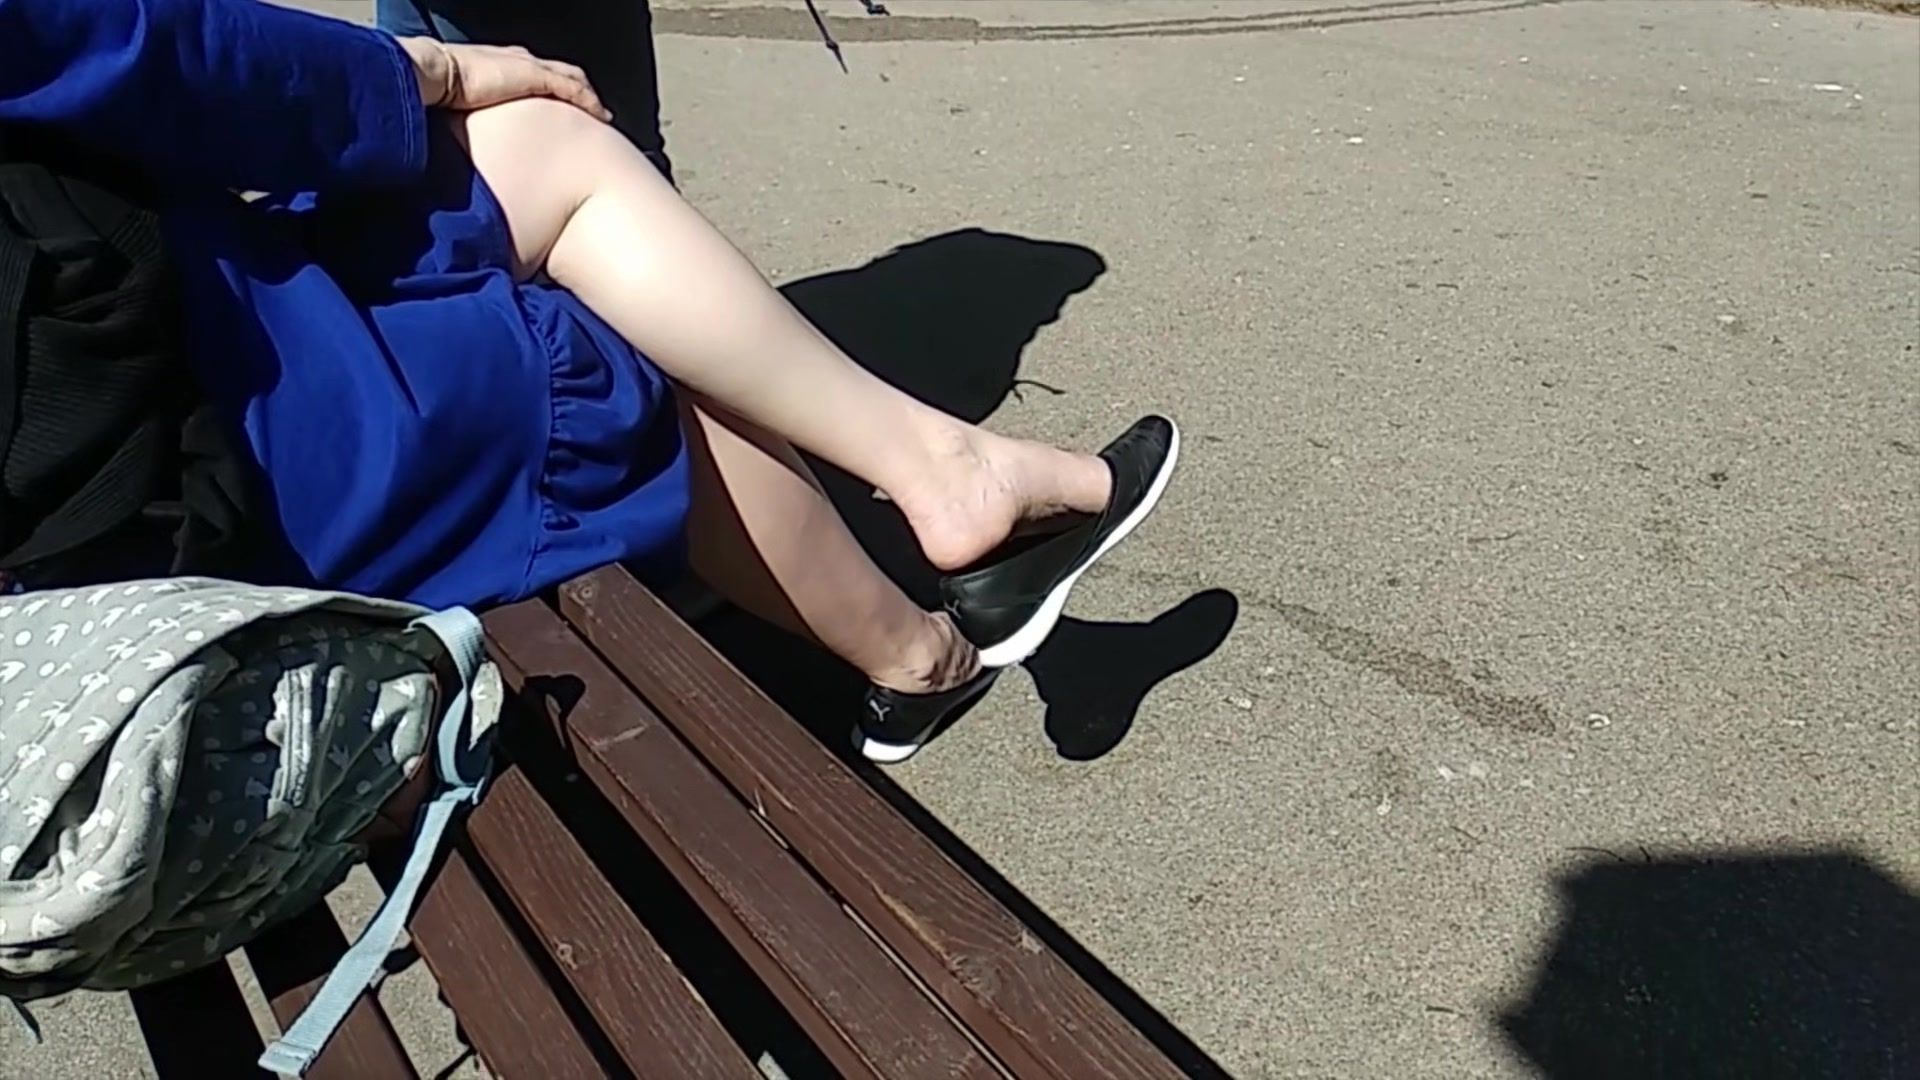 Small Amateur Girl Gets Filmed Dangling Her Flat Shoes In Public Twink